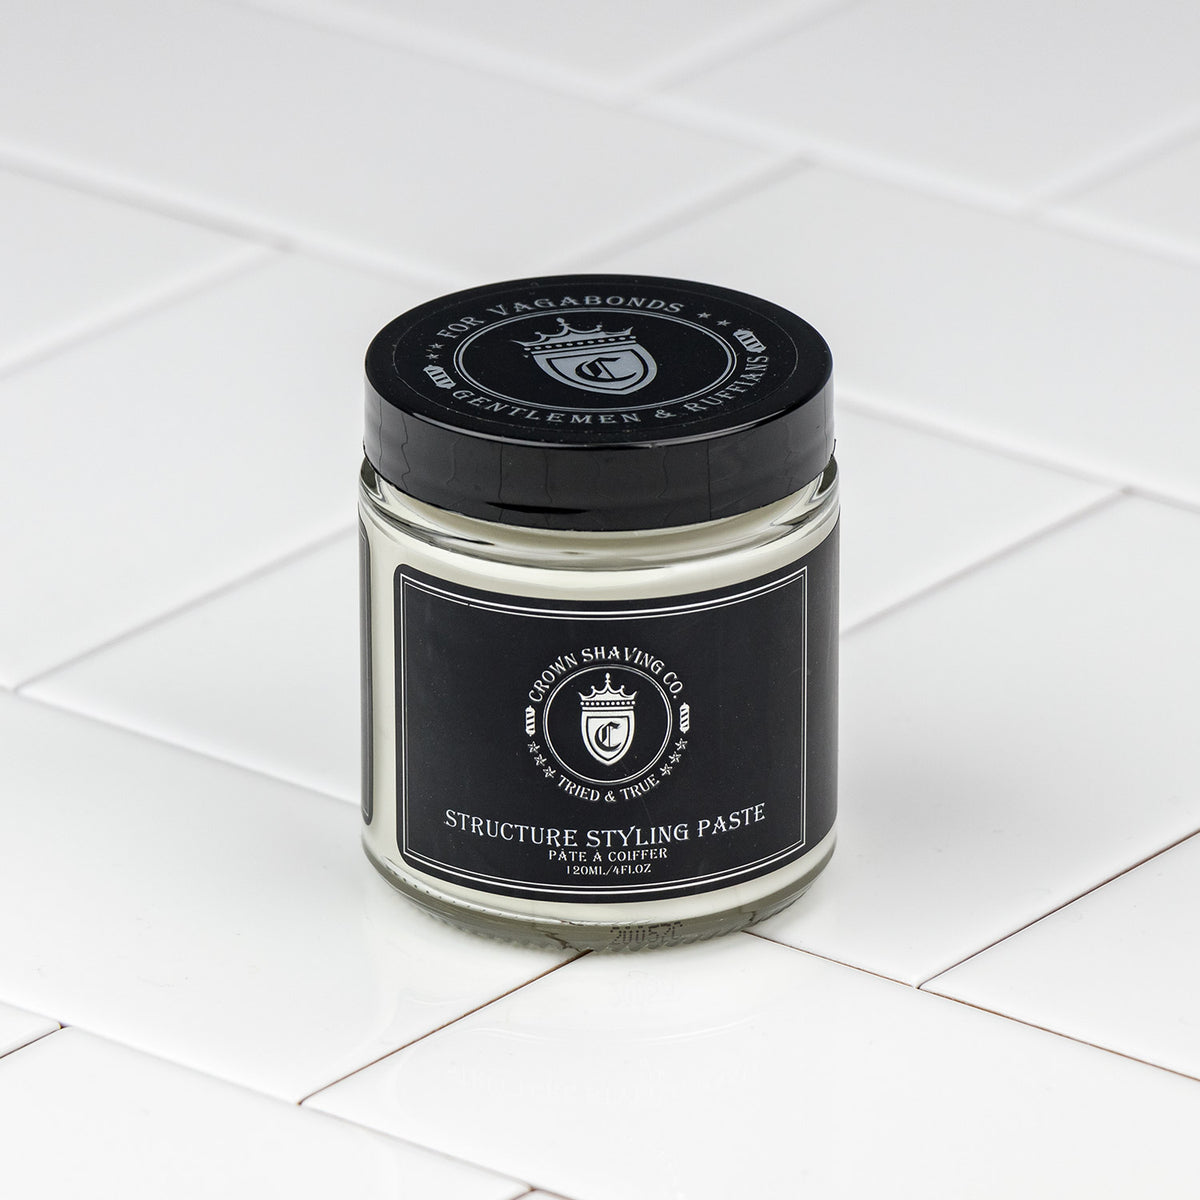 Crown Shaving Co. Structure Styling Paste